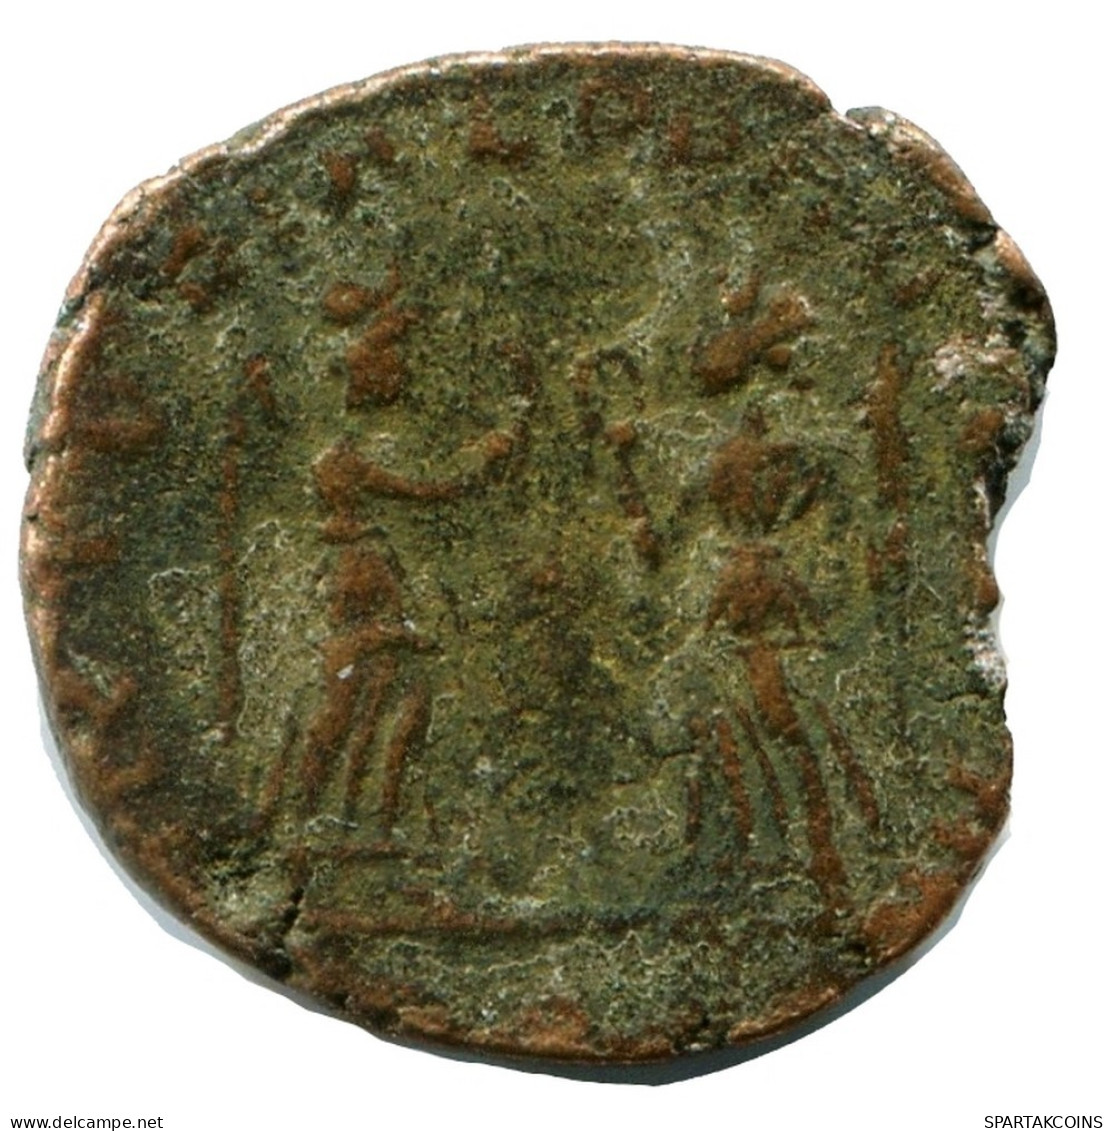 CONSTANS MINTED IN ROME ITALY FOUND IN IHNASYAH HOARD EGYPT #ANC11527.14.F.A - El Imperio Christiano (307 / 363)